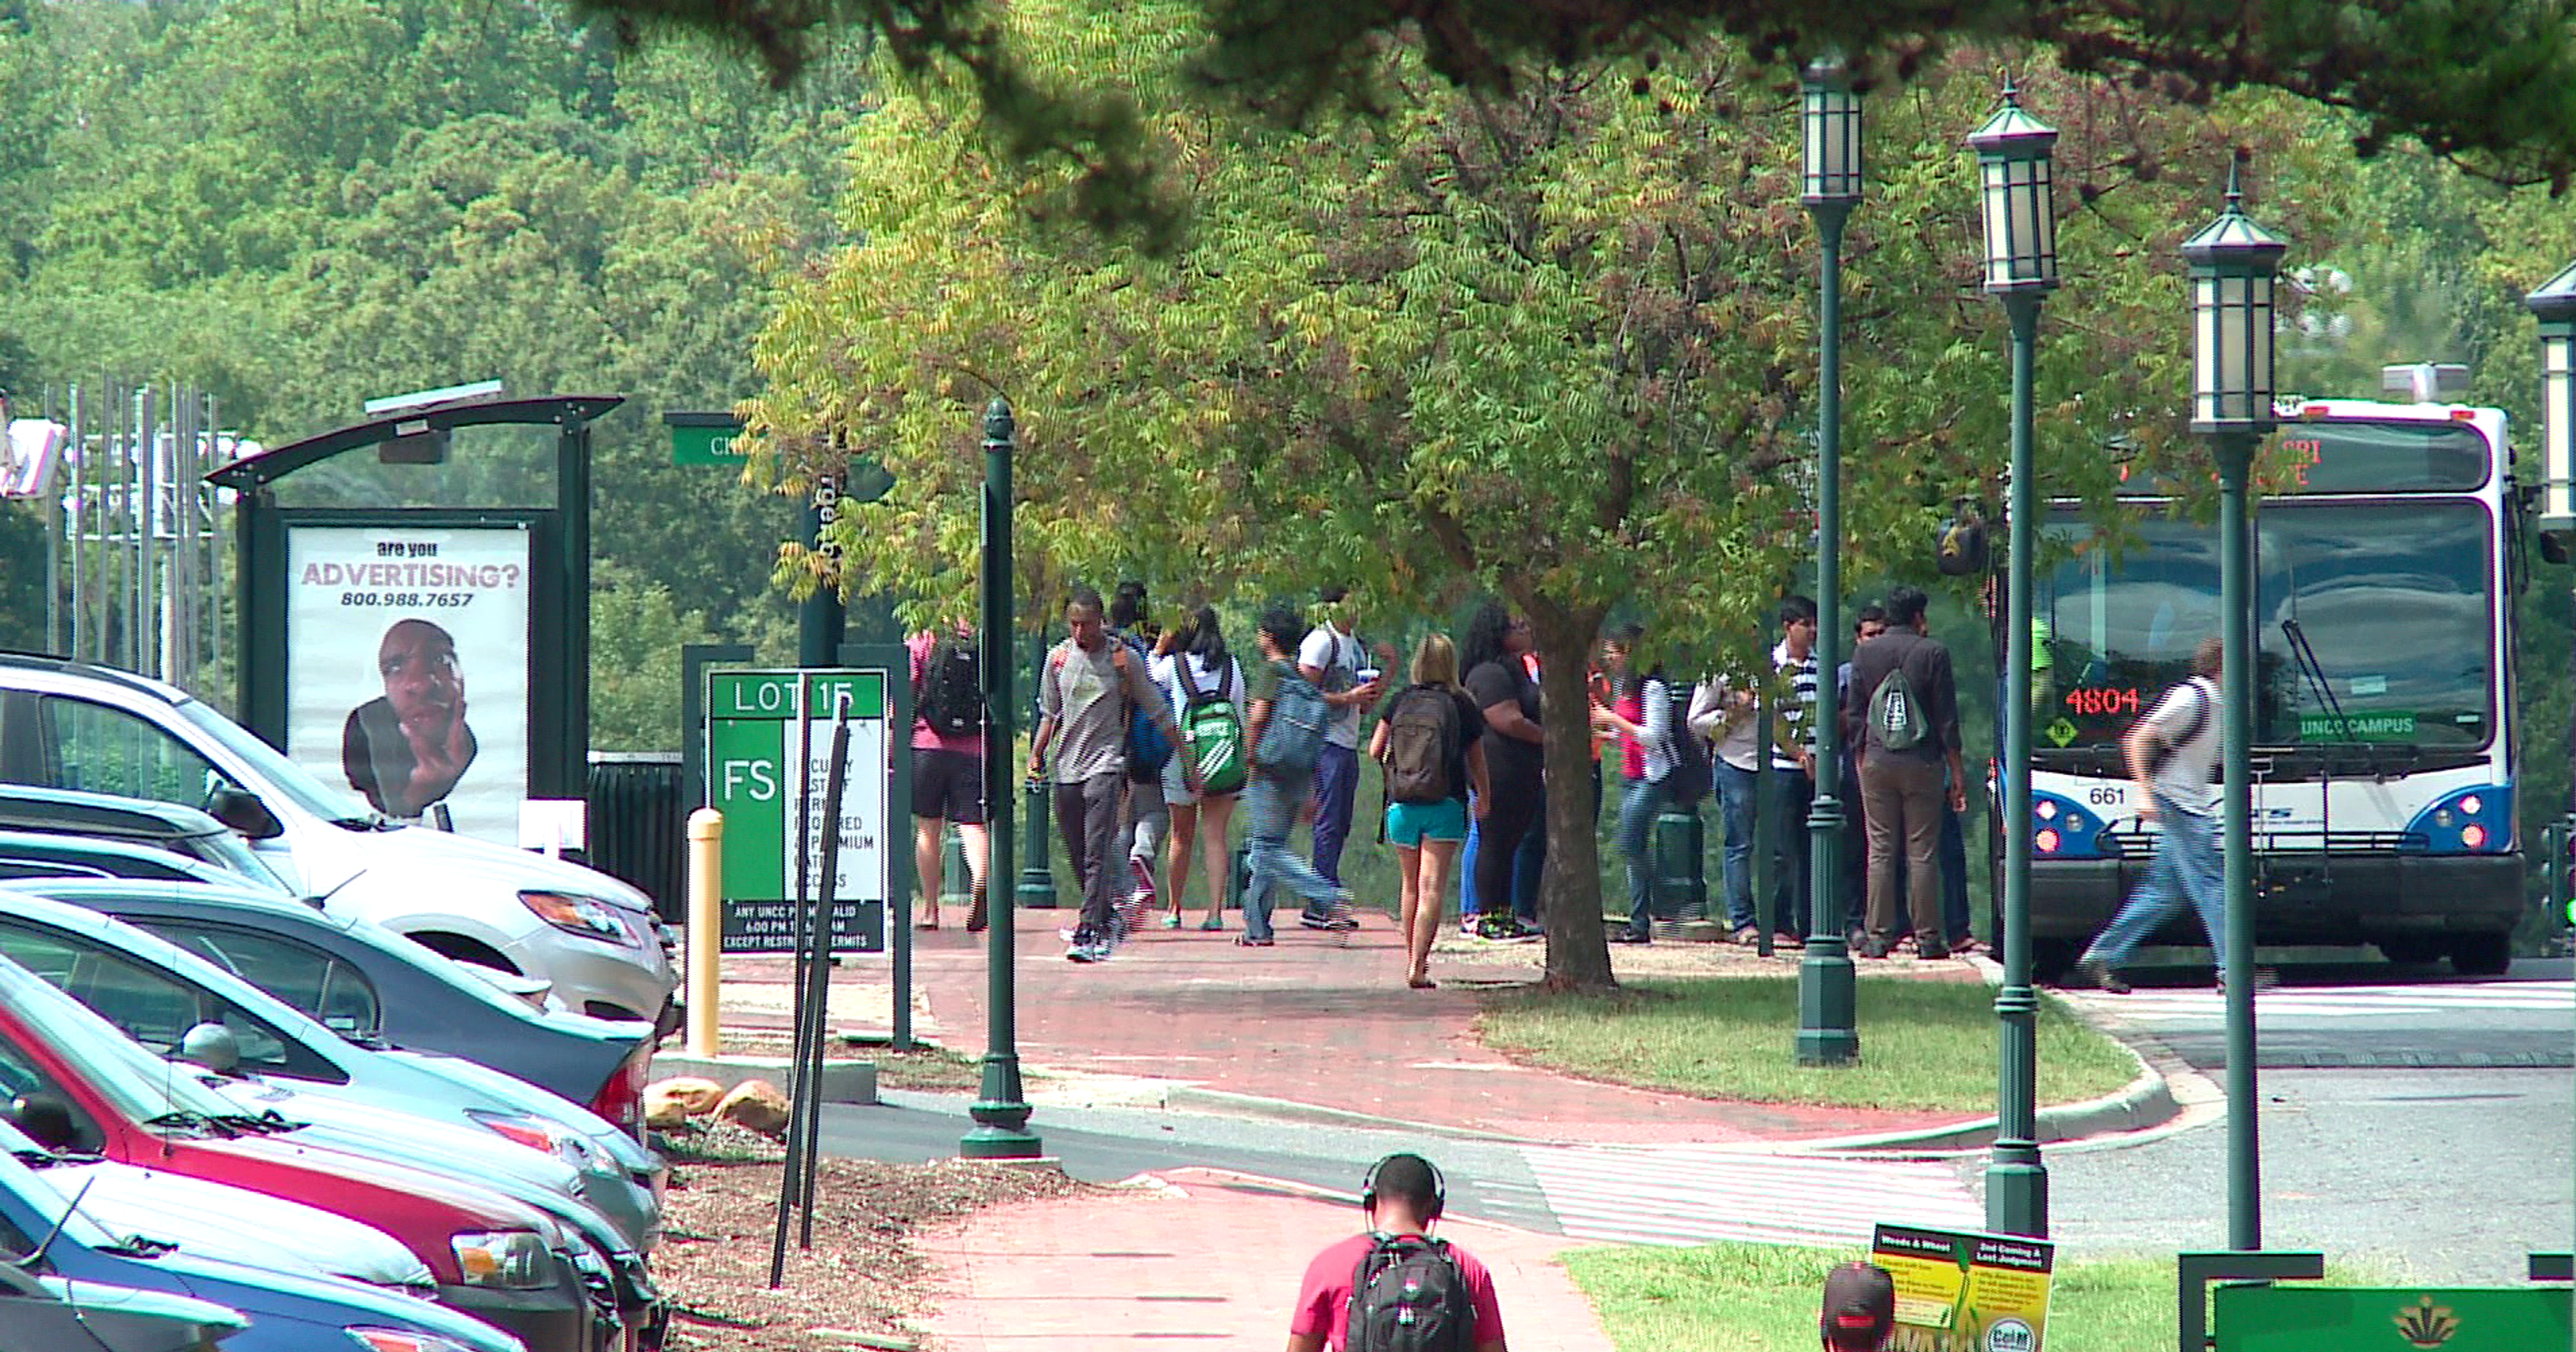 2 Dead and 4 Injured In A Shooting At The University of North Carolina in Charlotte